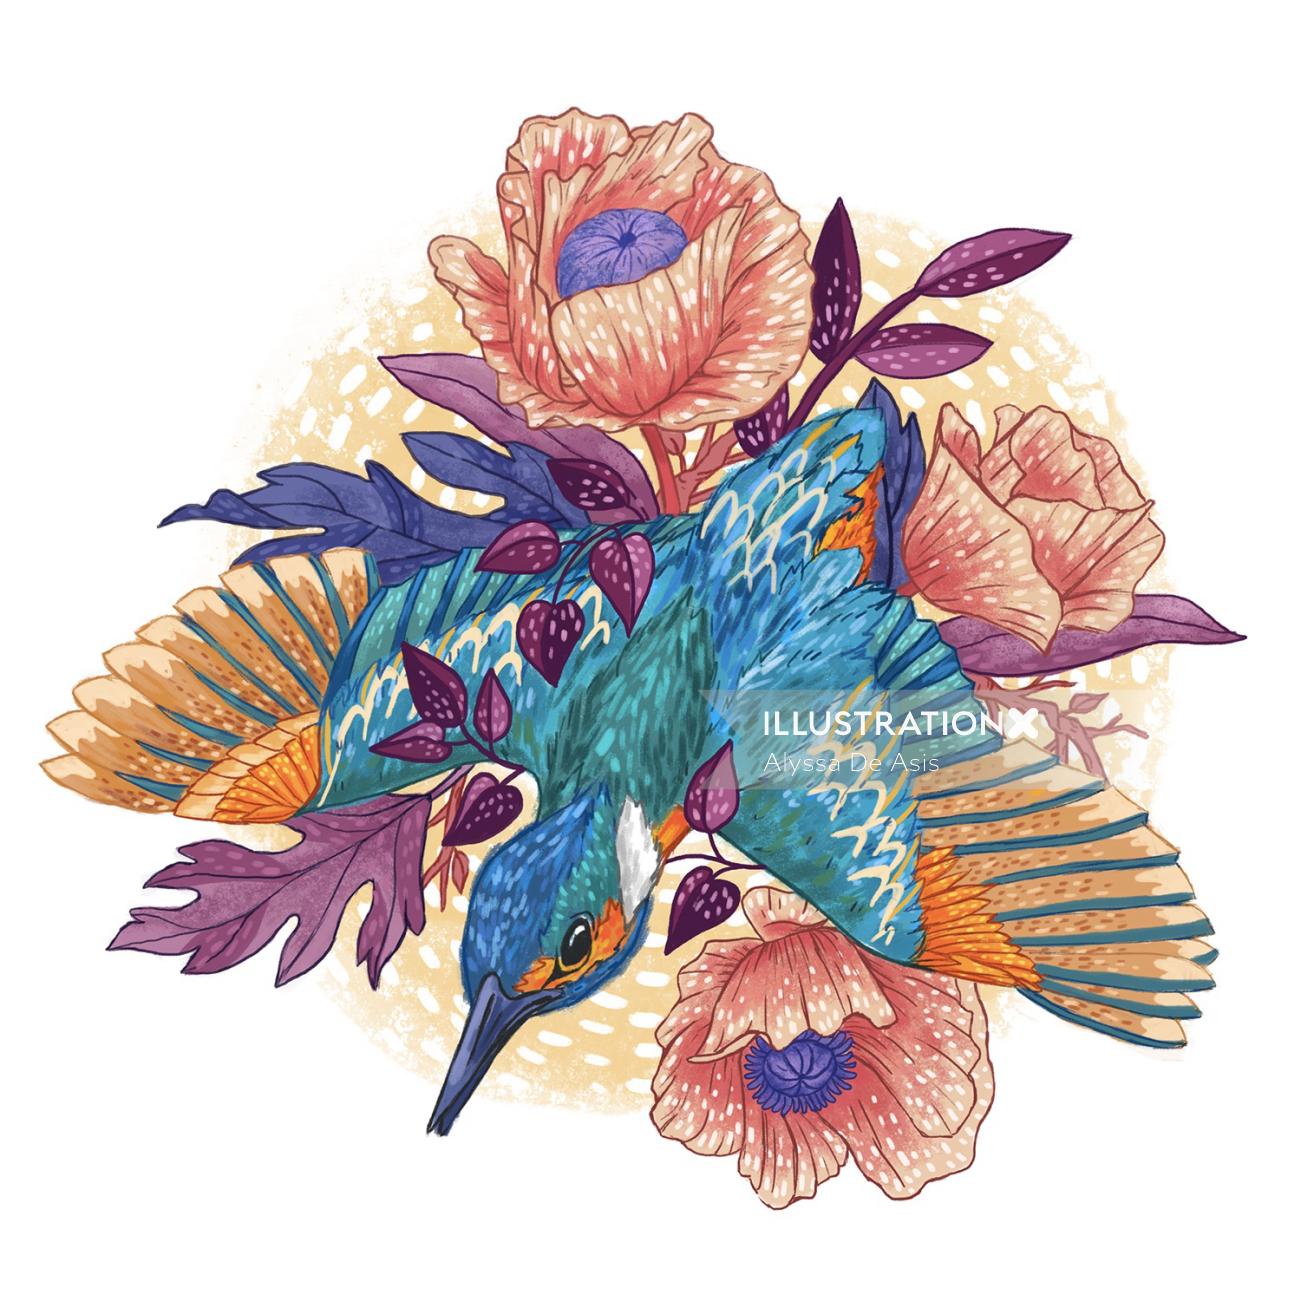 Painting of a bird flying on flowers